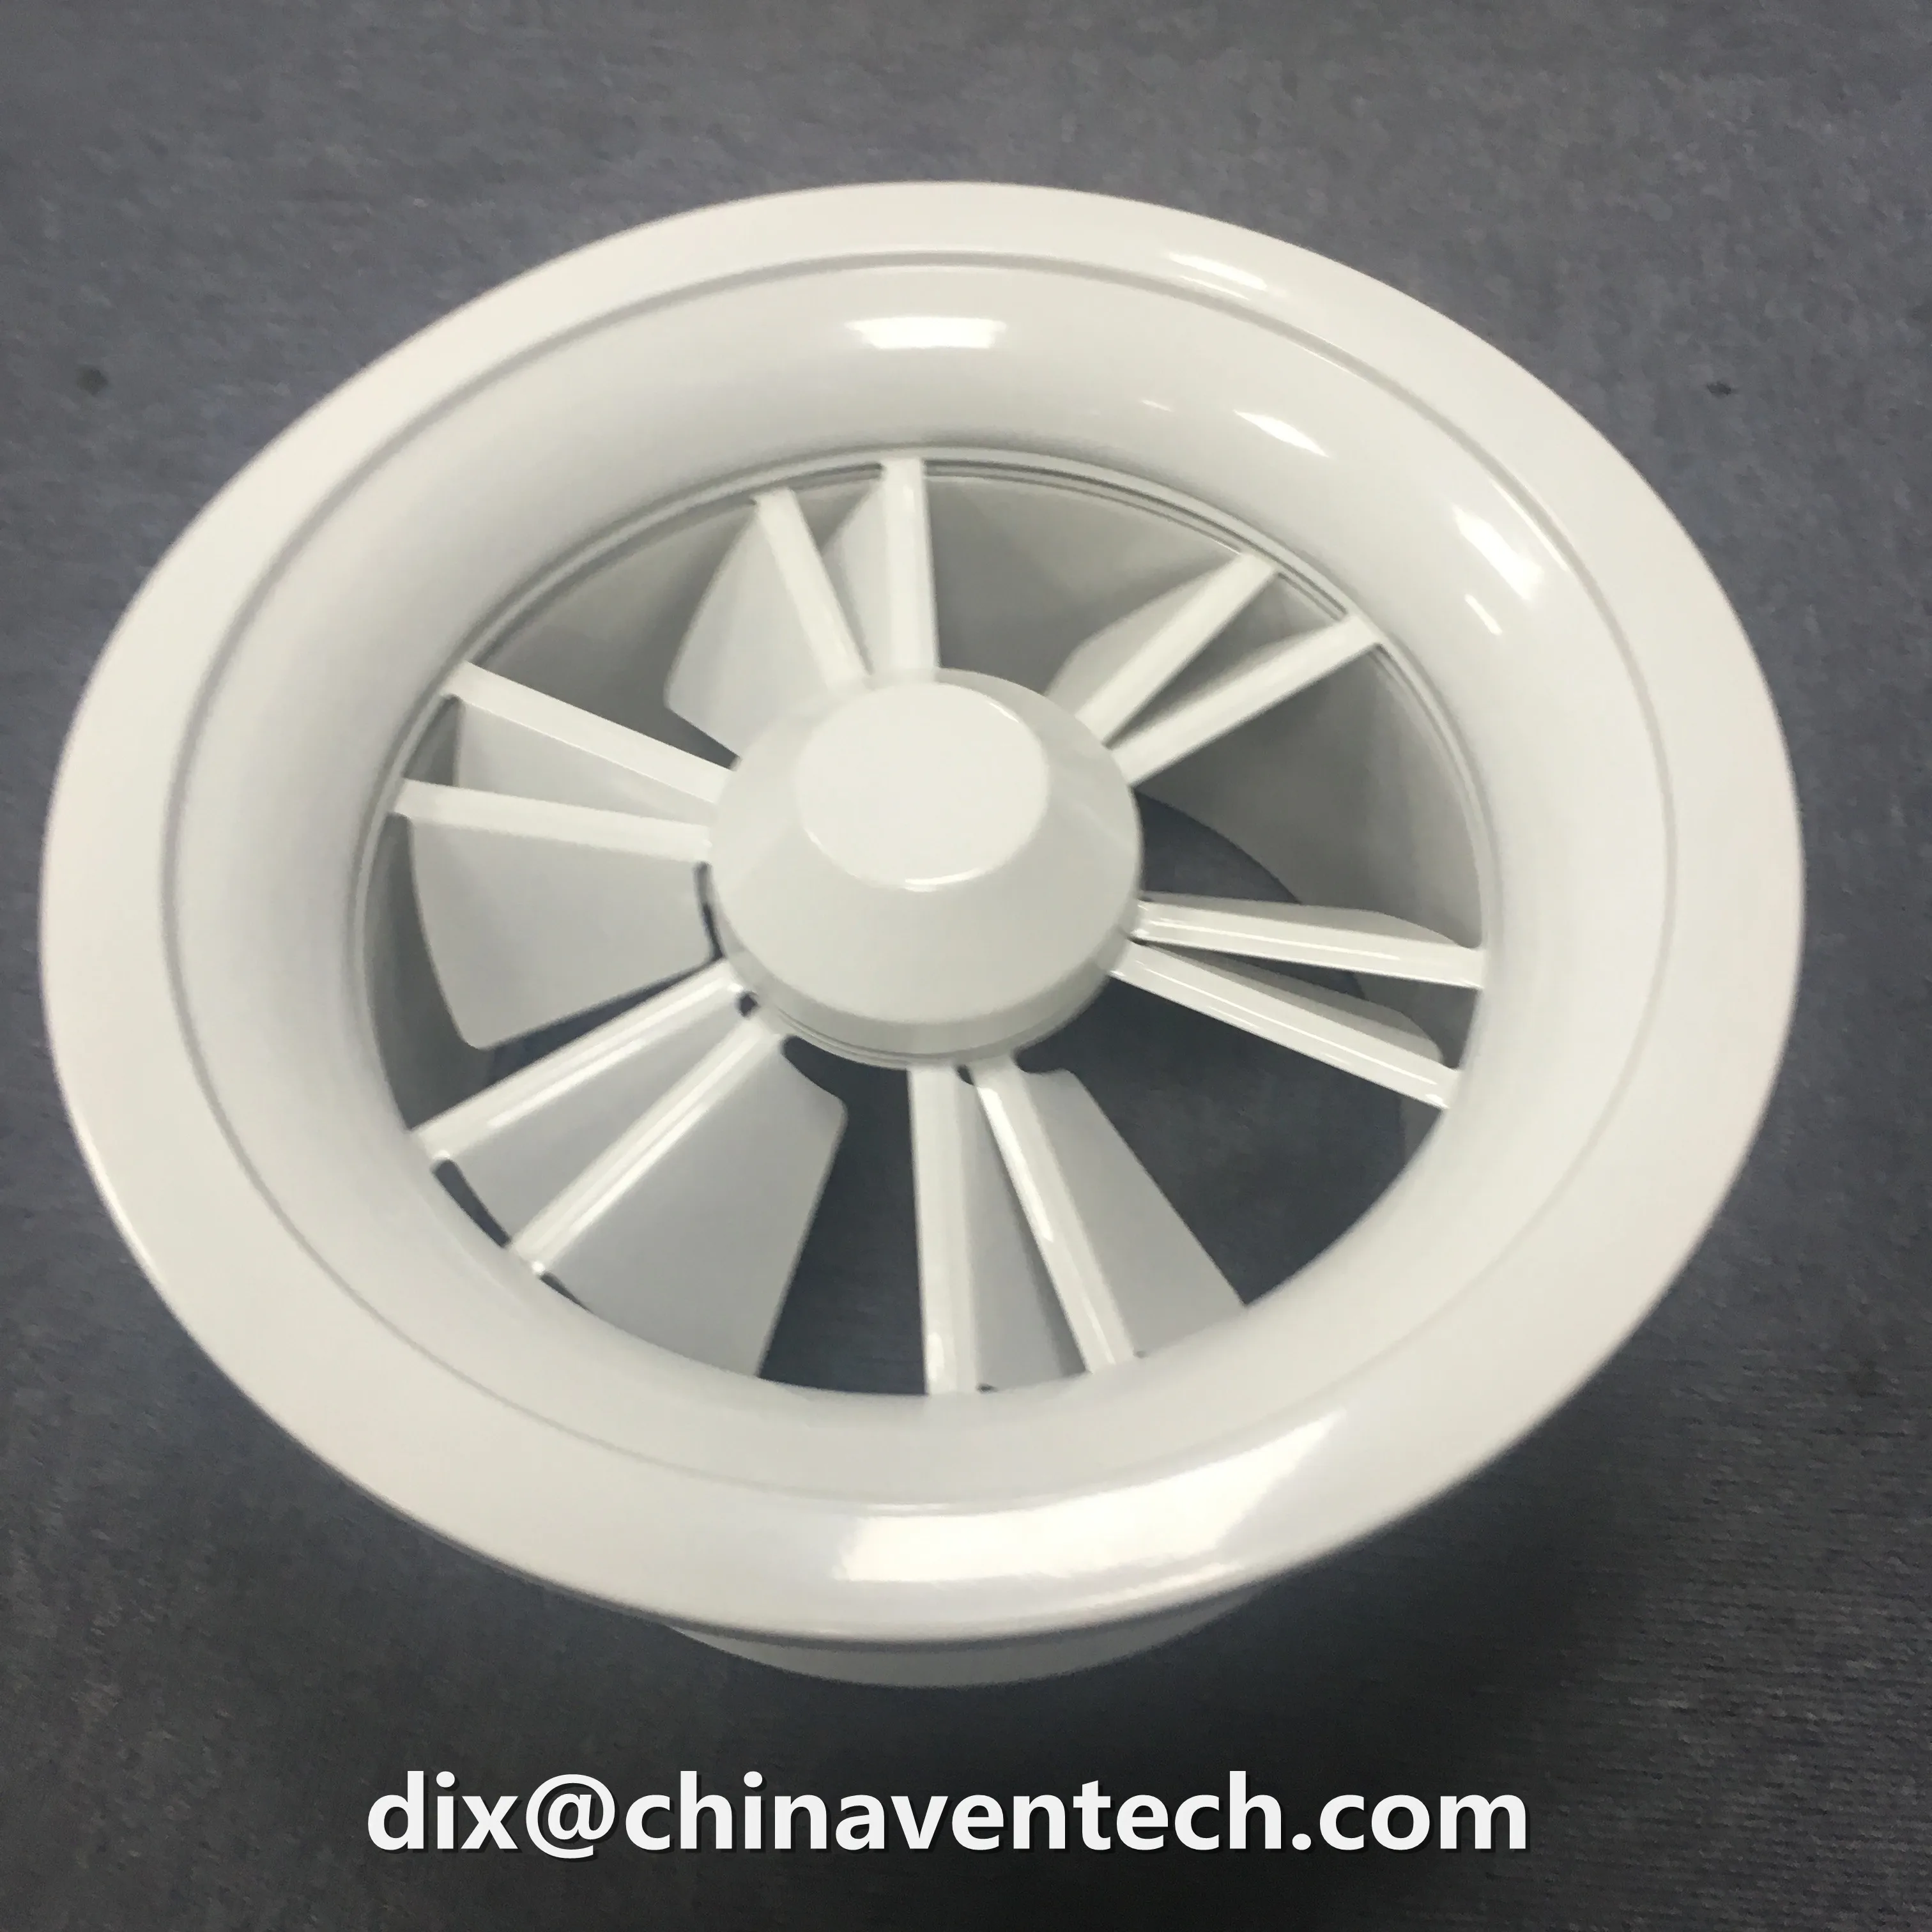 High Quality Aluminum Sheet 1.2mm Thickness Adjustable Round Swirl Diffuser For High Ceilings